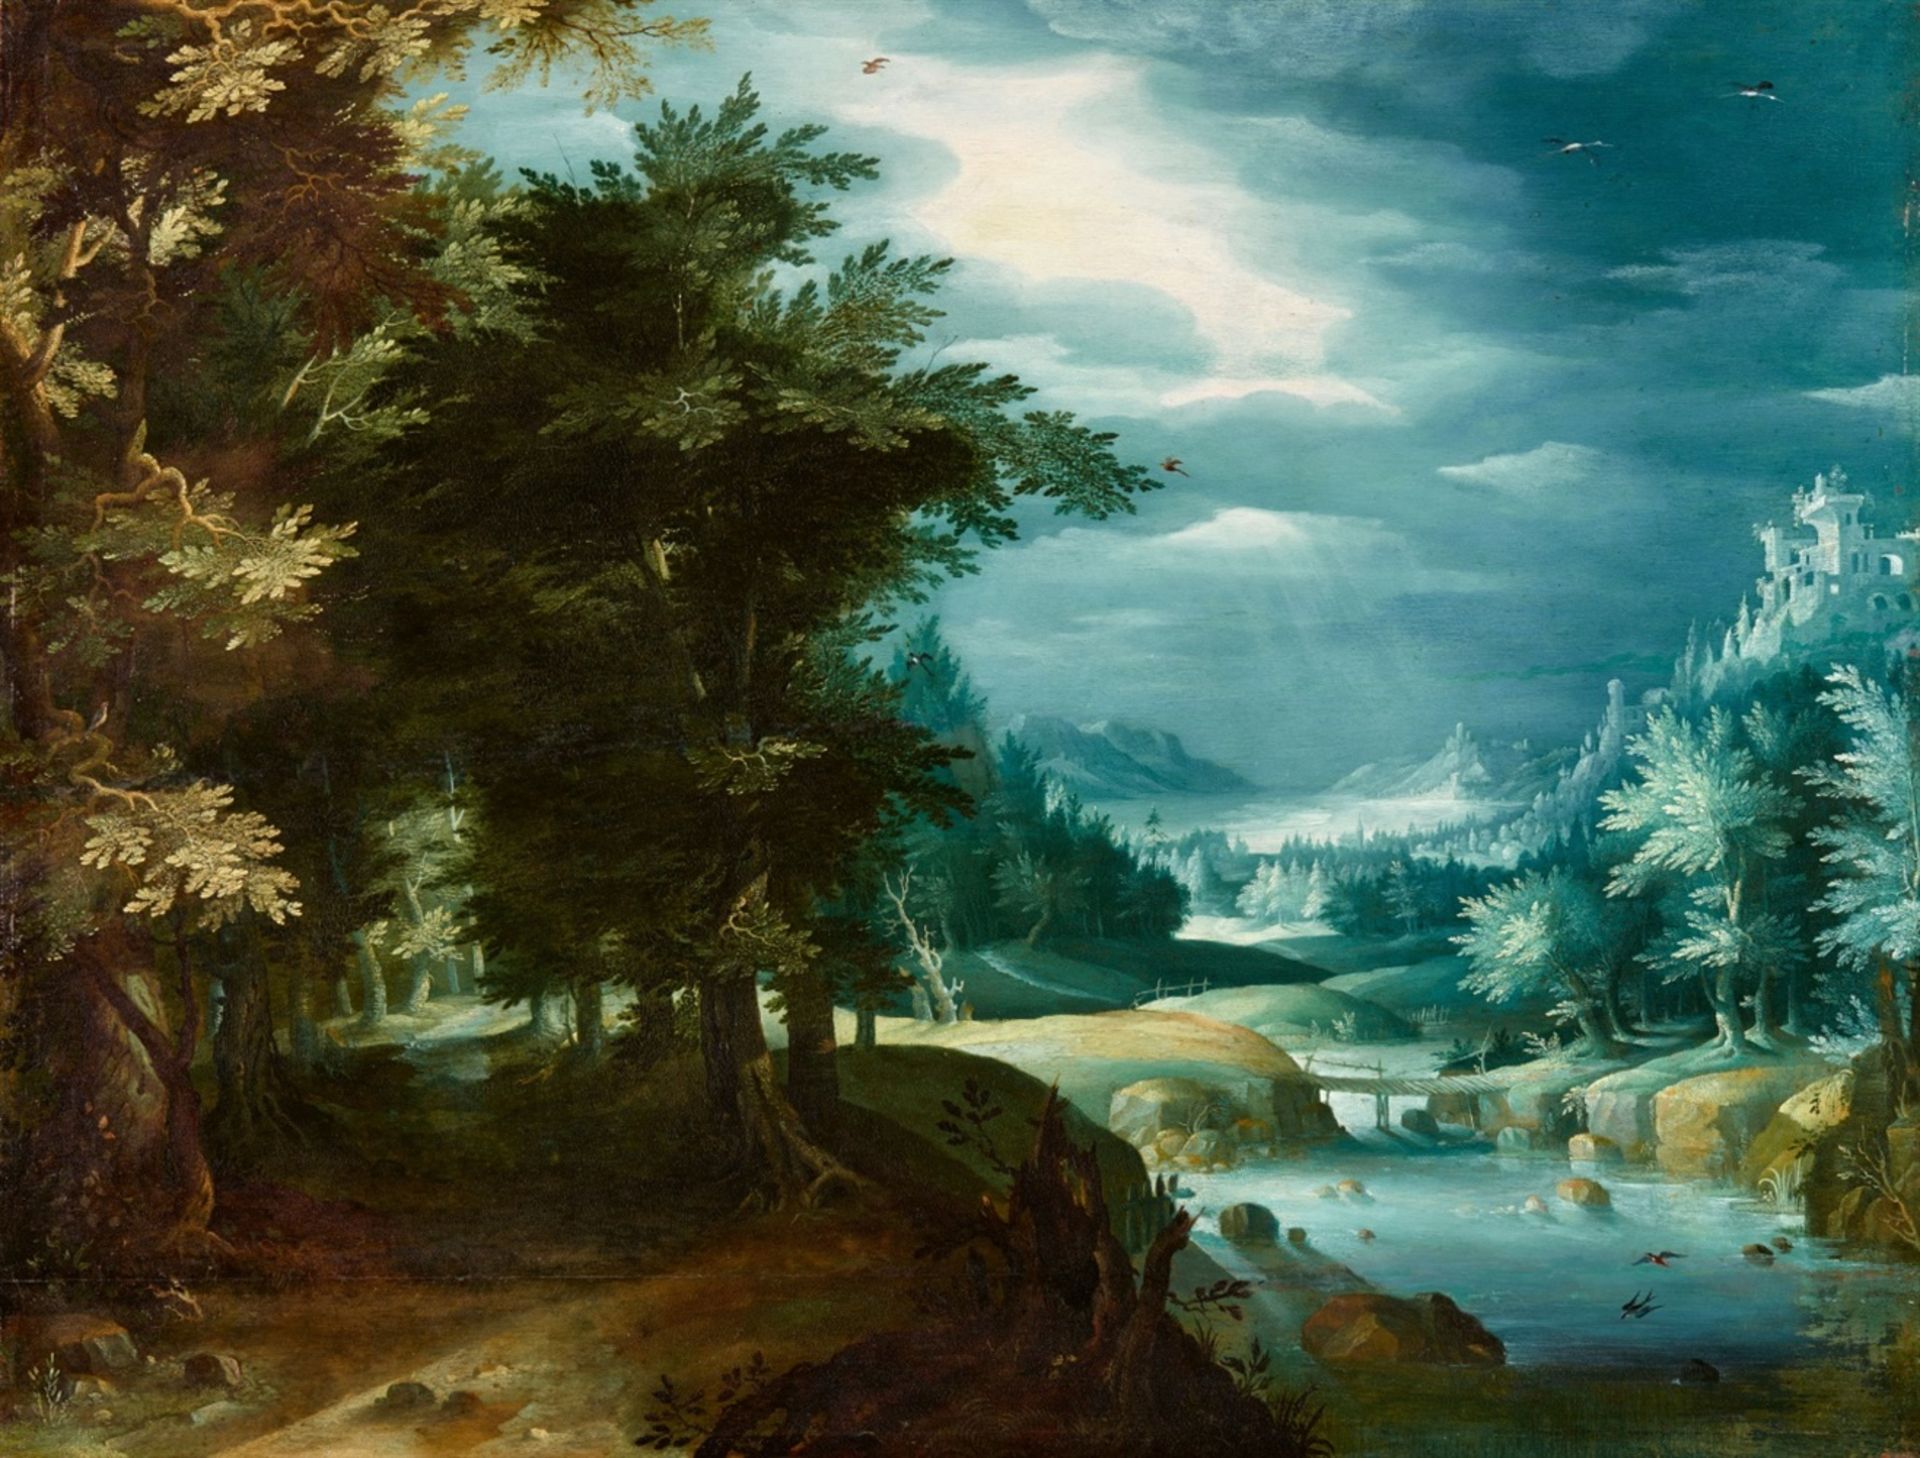 Paul Bril, circle ofForest Landscape with a View into the DistanceOil on panel. 42 x 55 cm.